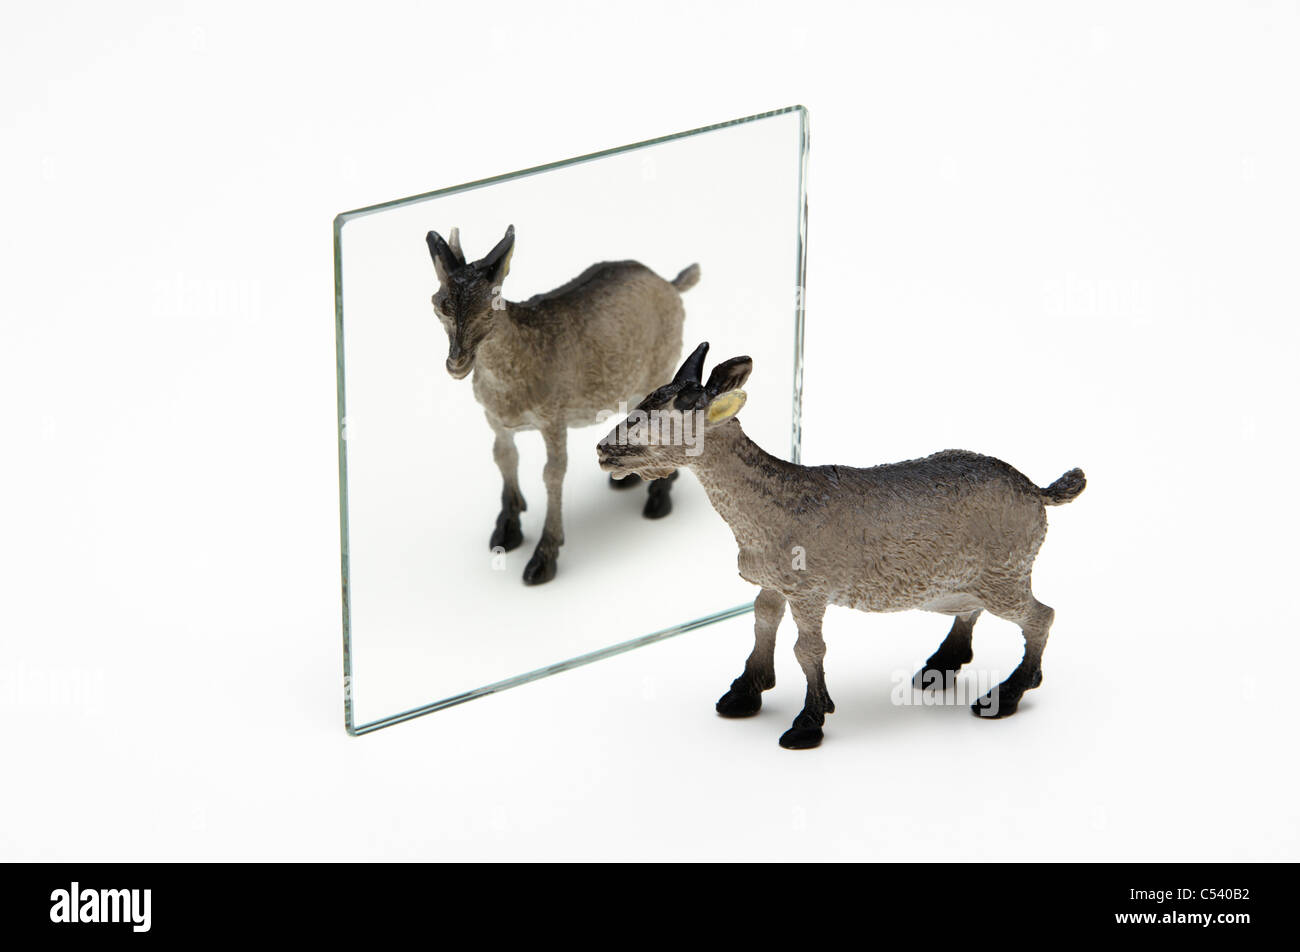 Mirror reflection. A toy goat reflected in a plane mirror. Stock Photo